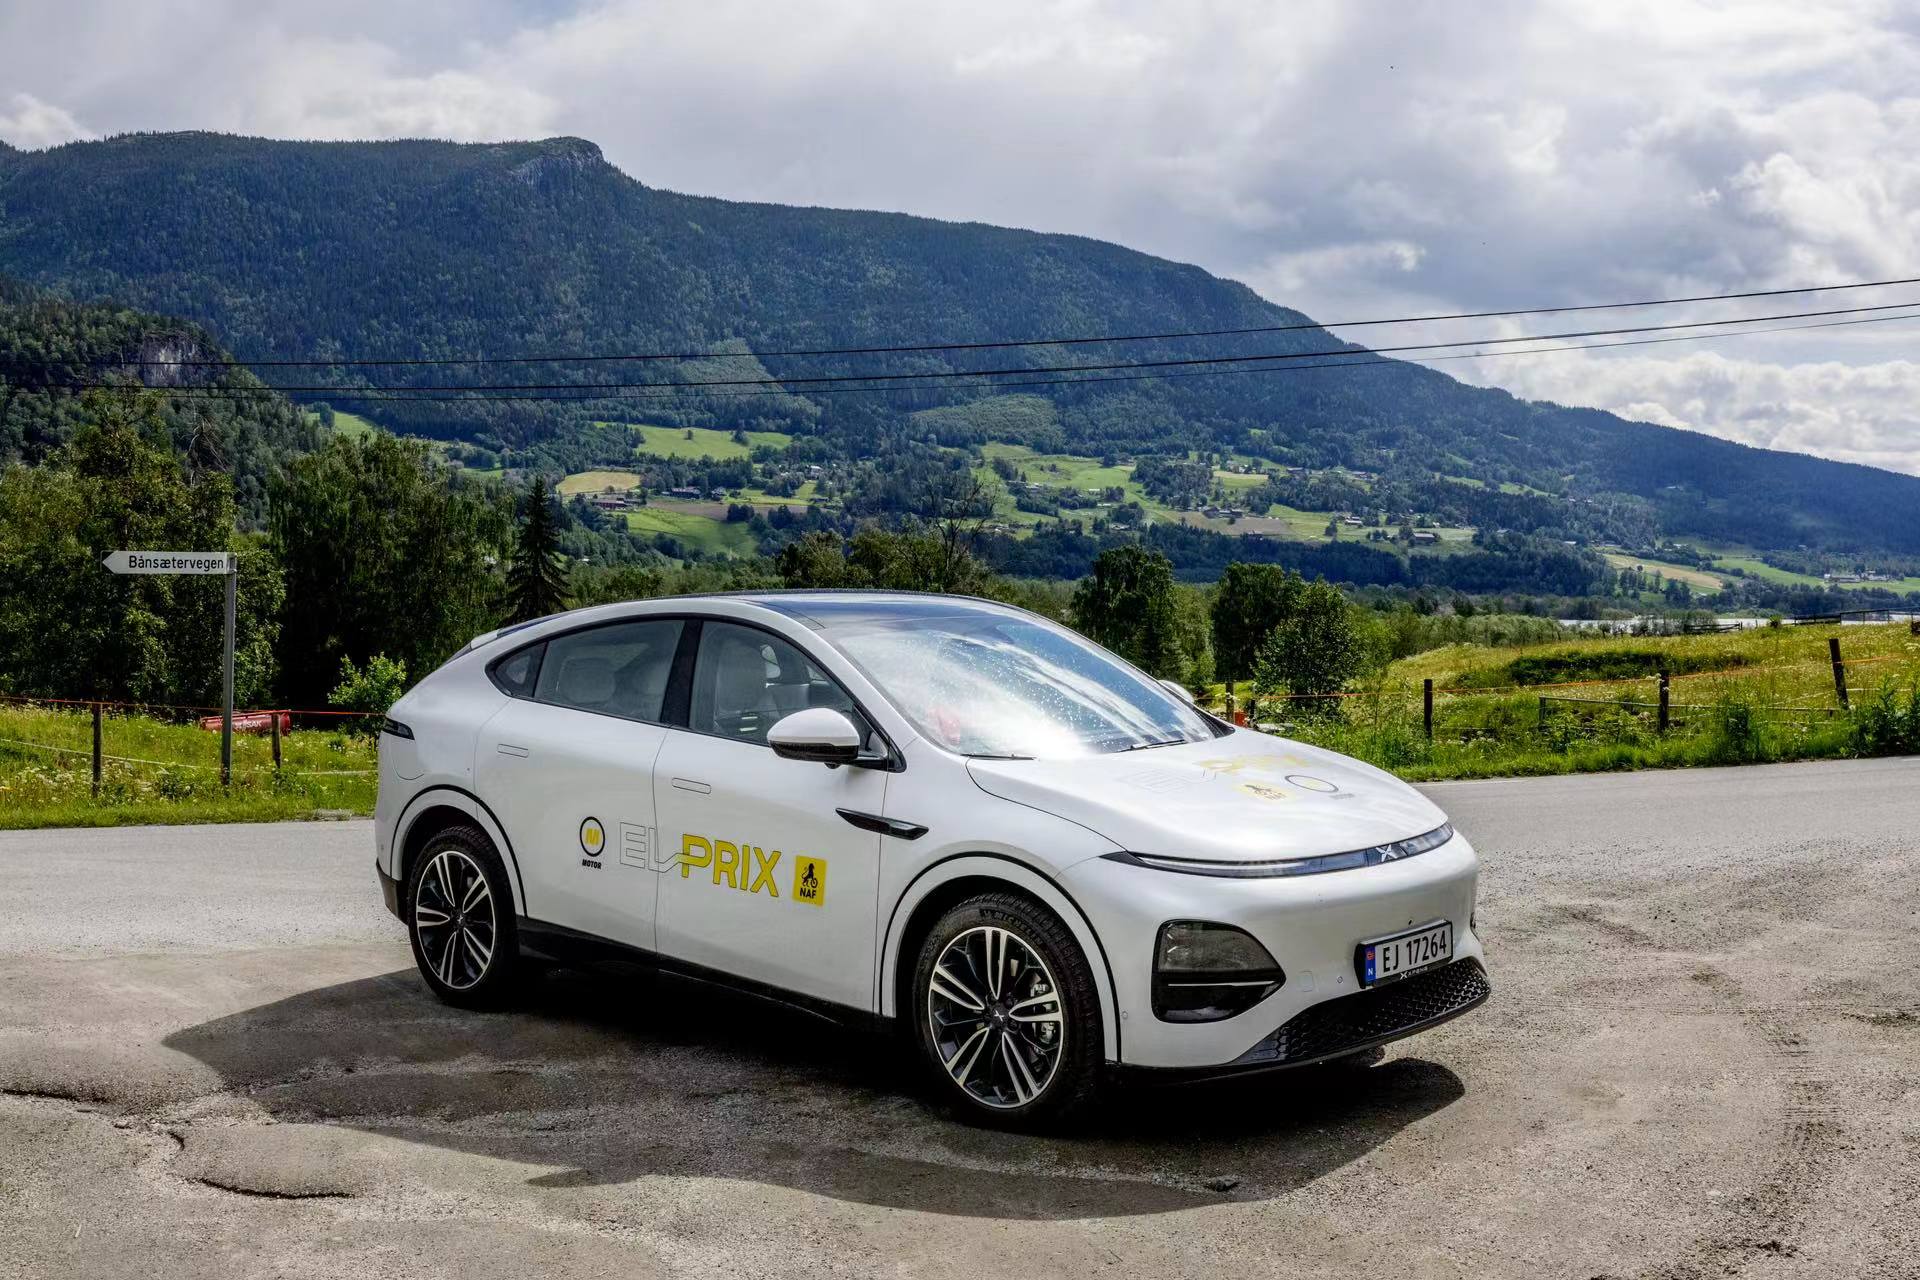 XPENG Motors impresses at El Prix NAF Summer Test, with the new G6 nearly matching its 550 km WLTP range and showcasing advanced charging efficiency, solidifying its European market reputation.